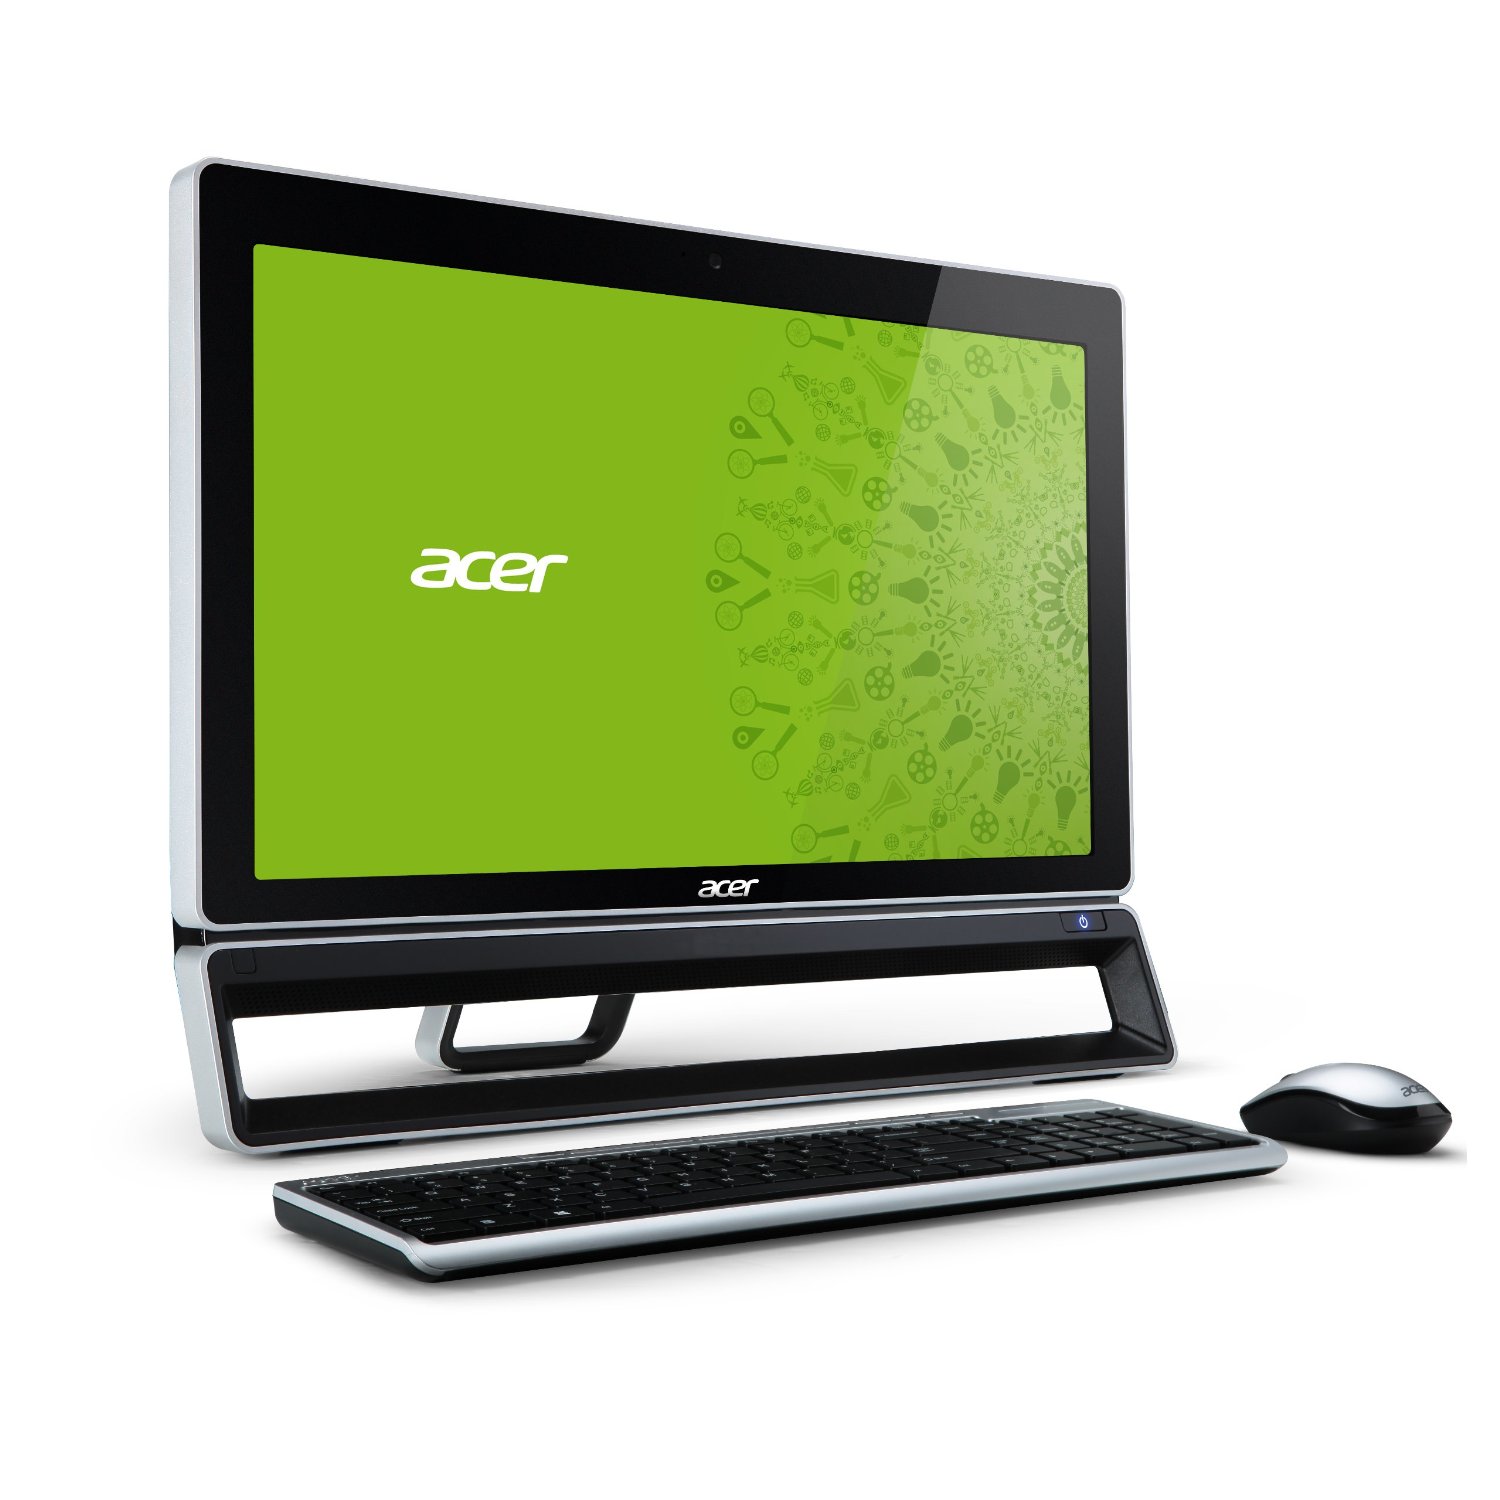 Acer AZS600-UR308 All-in-One PC